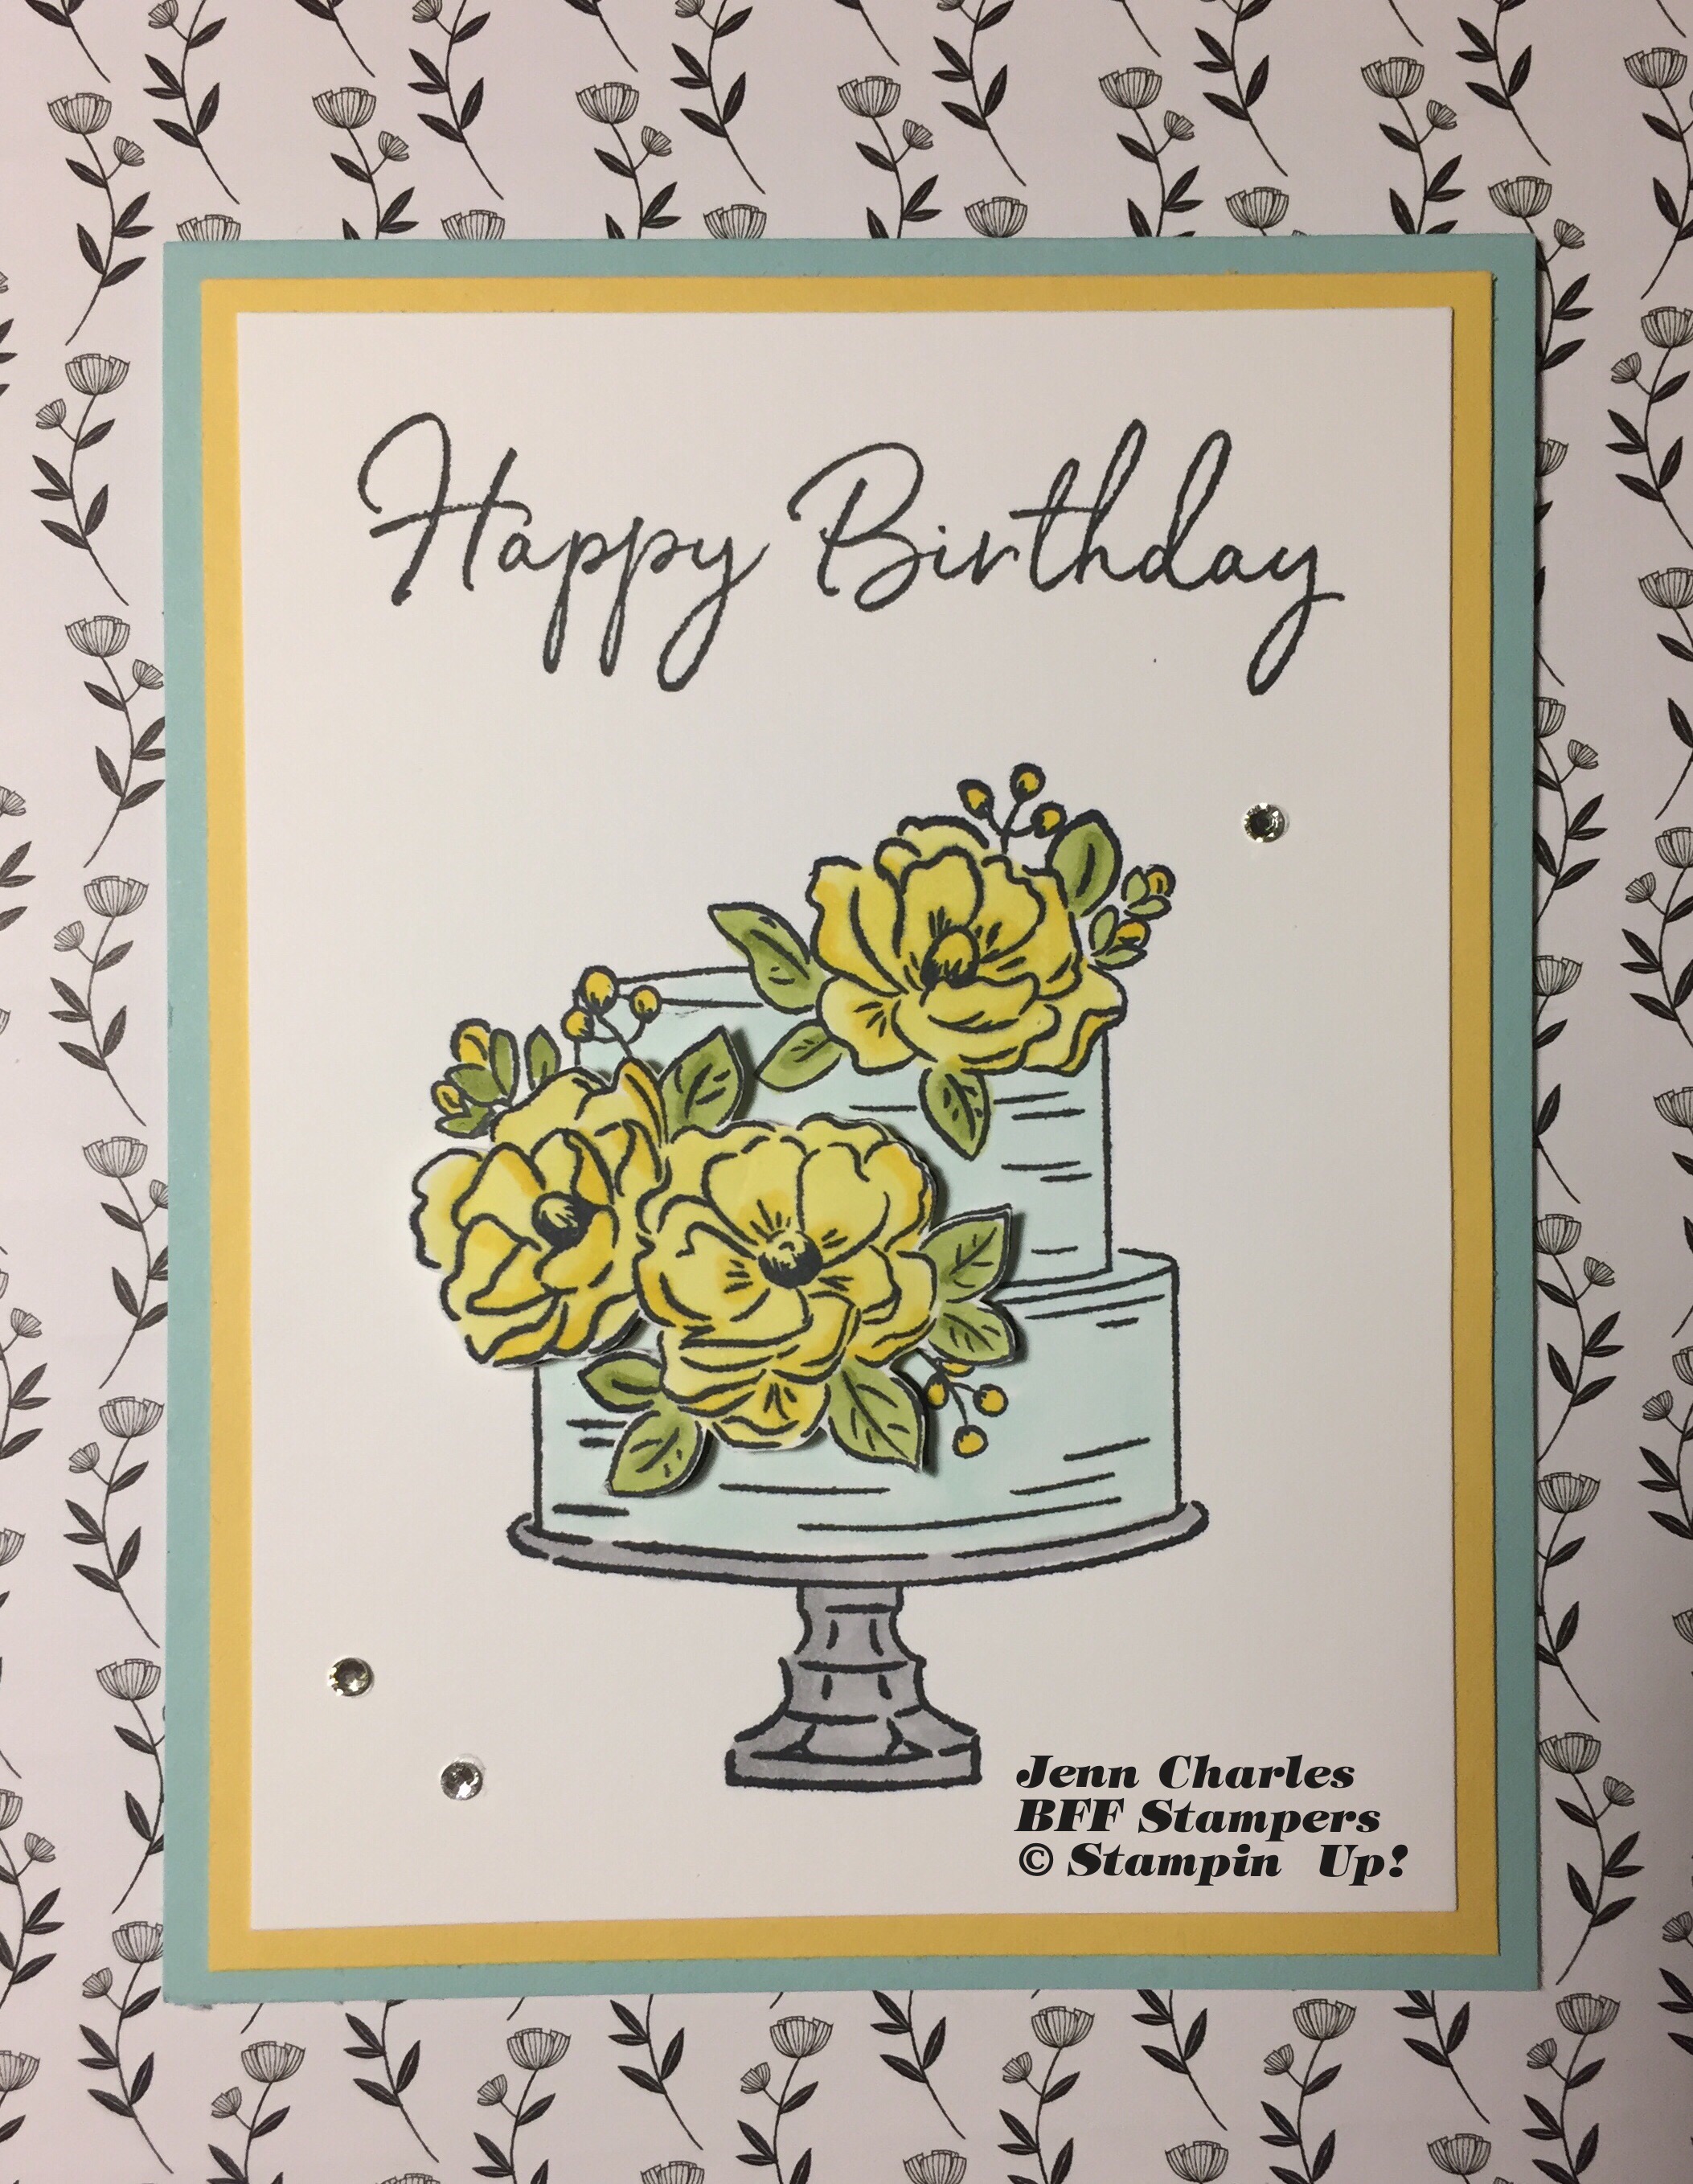 BFF Stampers by Jenn Charles, a Stampin’ Up! Independent Demonstrator